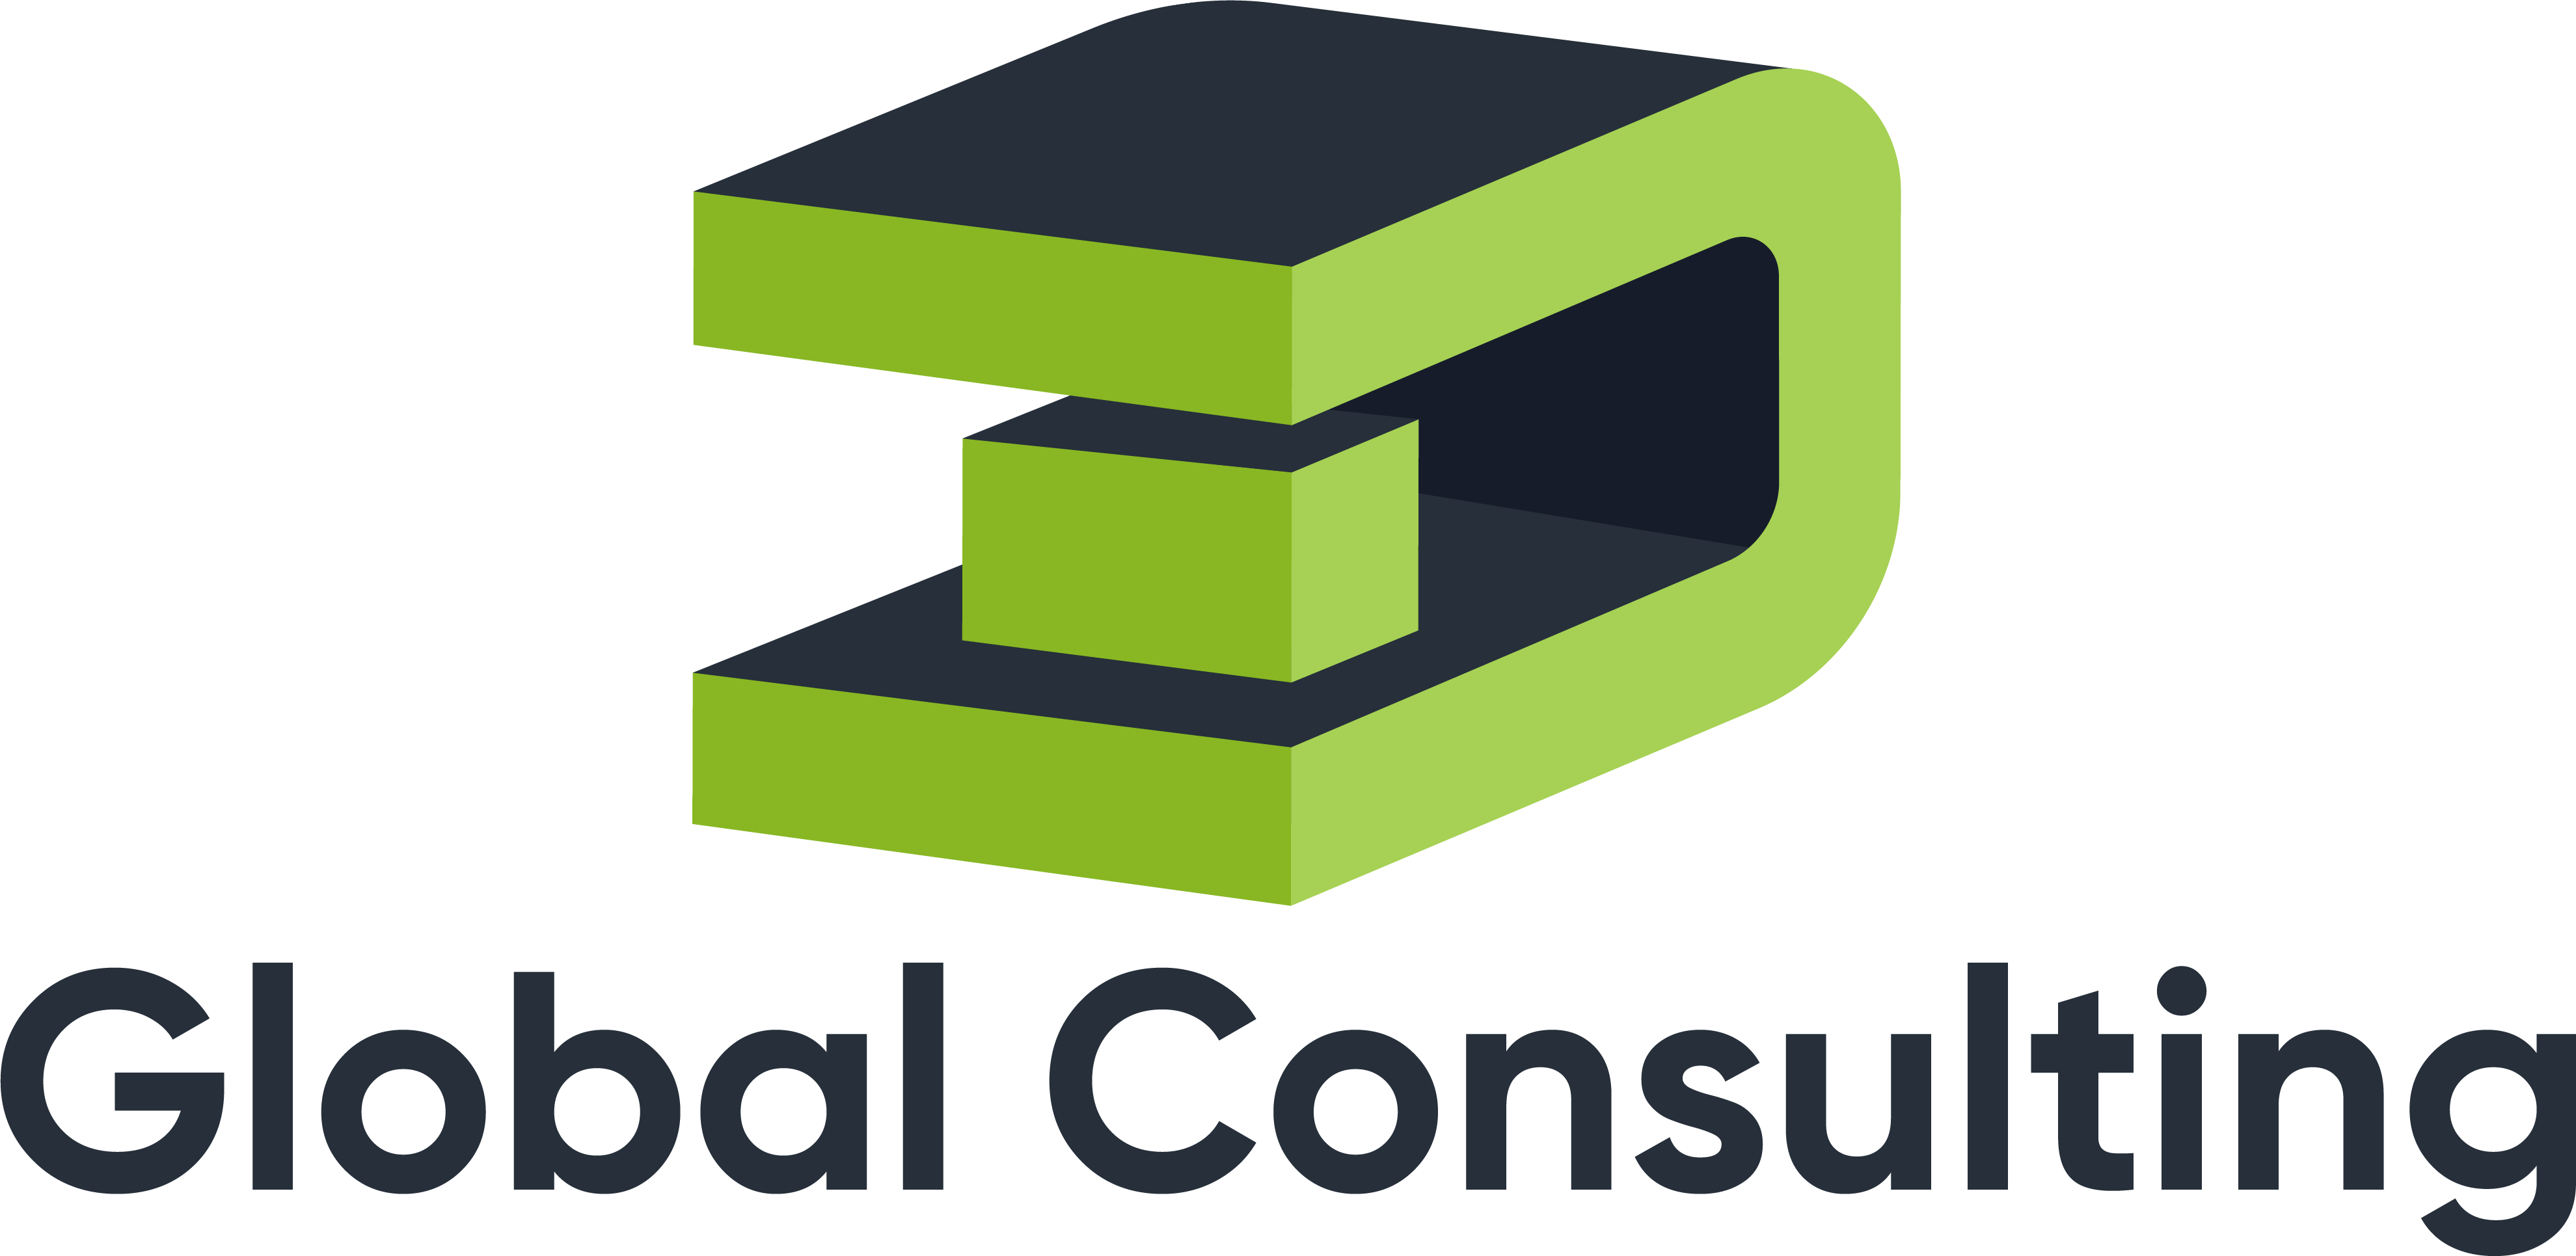 3D Global Consulting